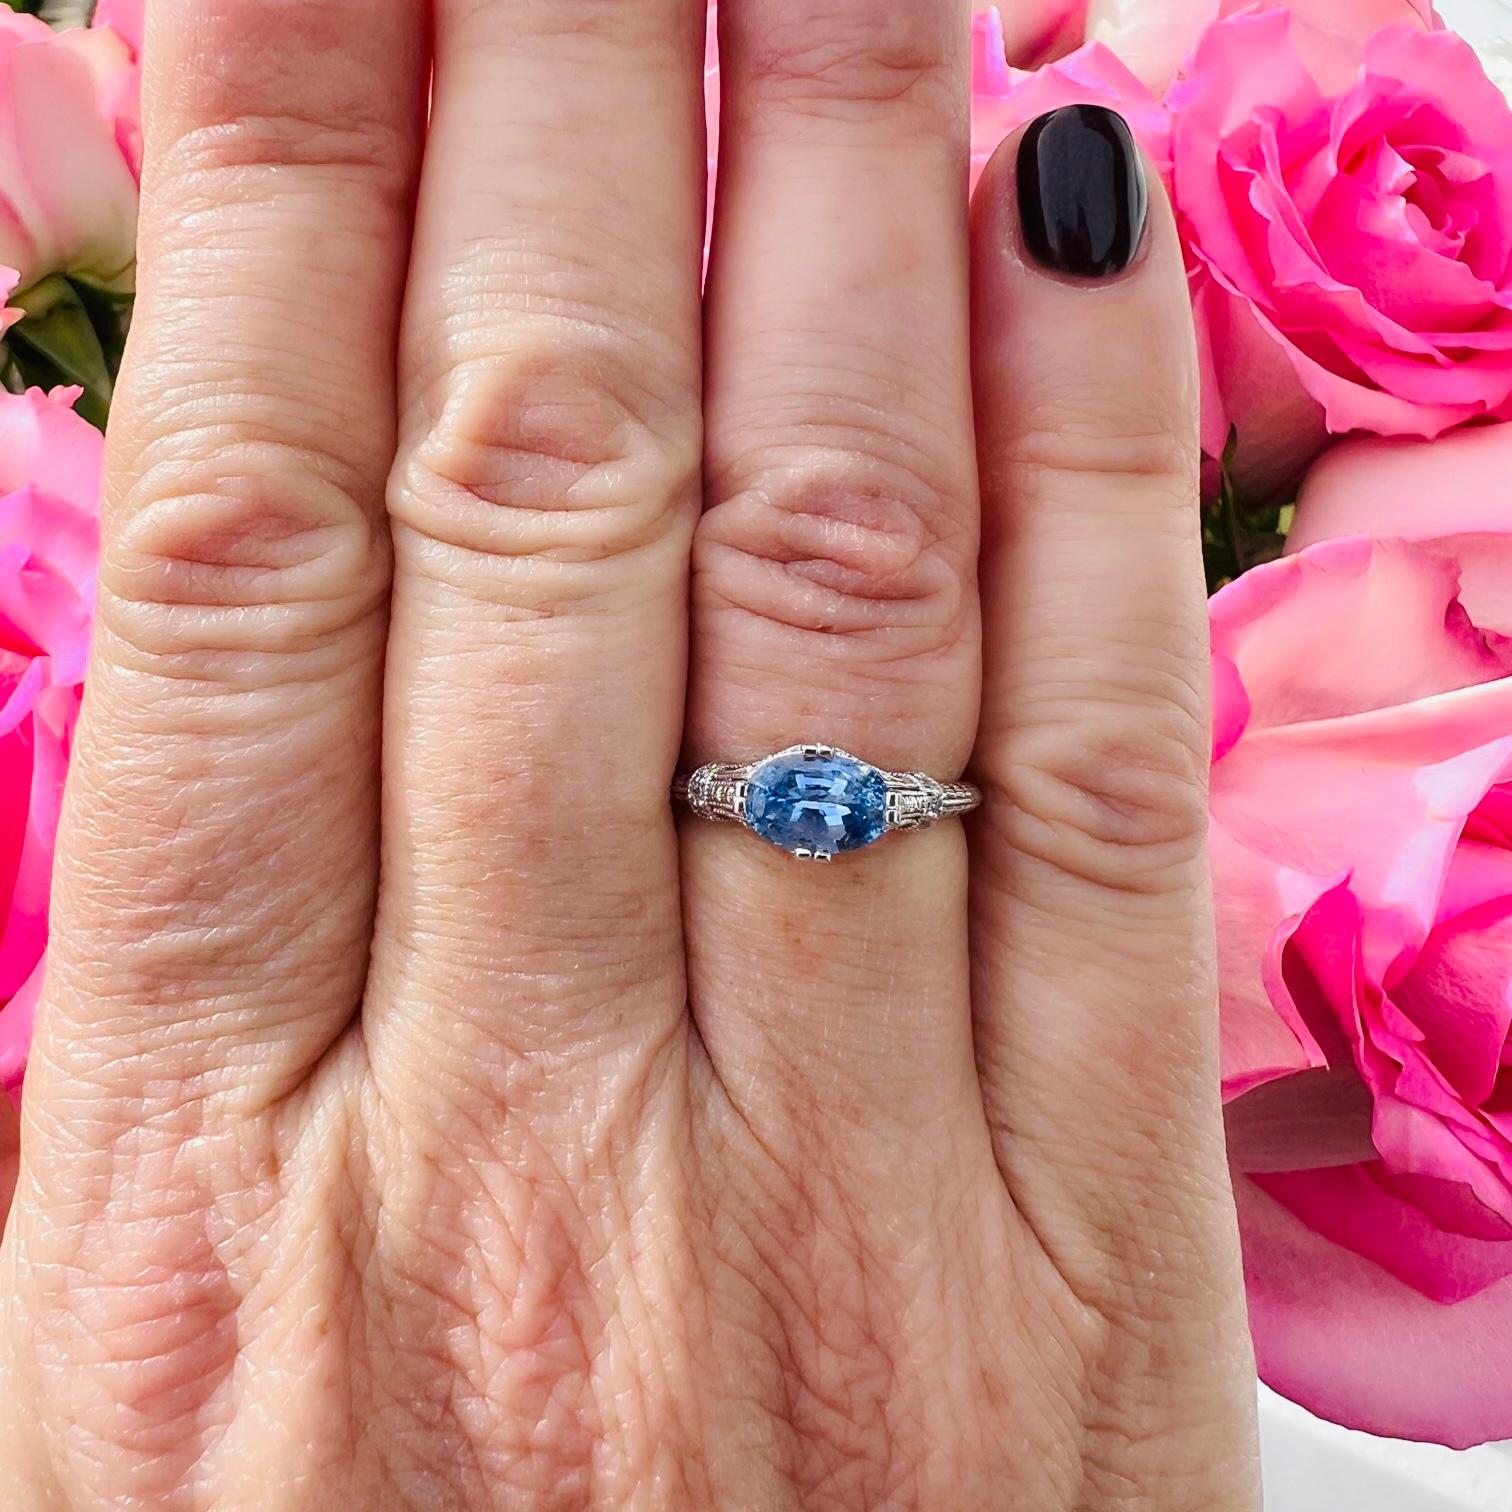 A unique ring that is sure to become a favorite! This 14 karat white gold beauty features an Oval Cut Ceylon Sapphire  horizontally set in a beautiful antique inspired ring. The vibrant blue sapphire weighs 1.43 carats and delivers excellent light